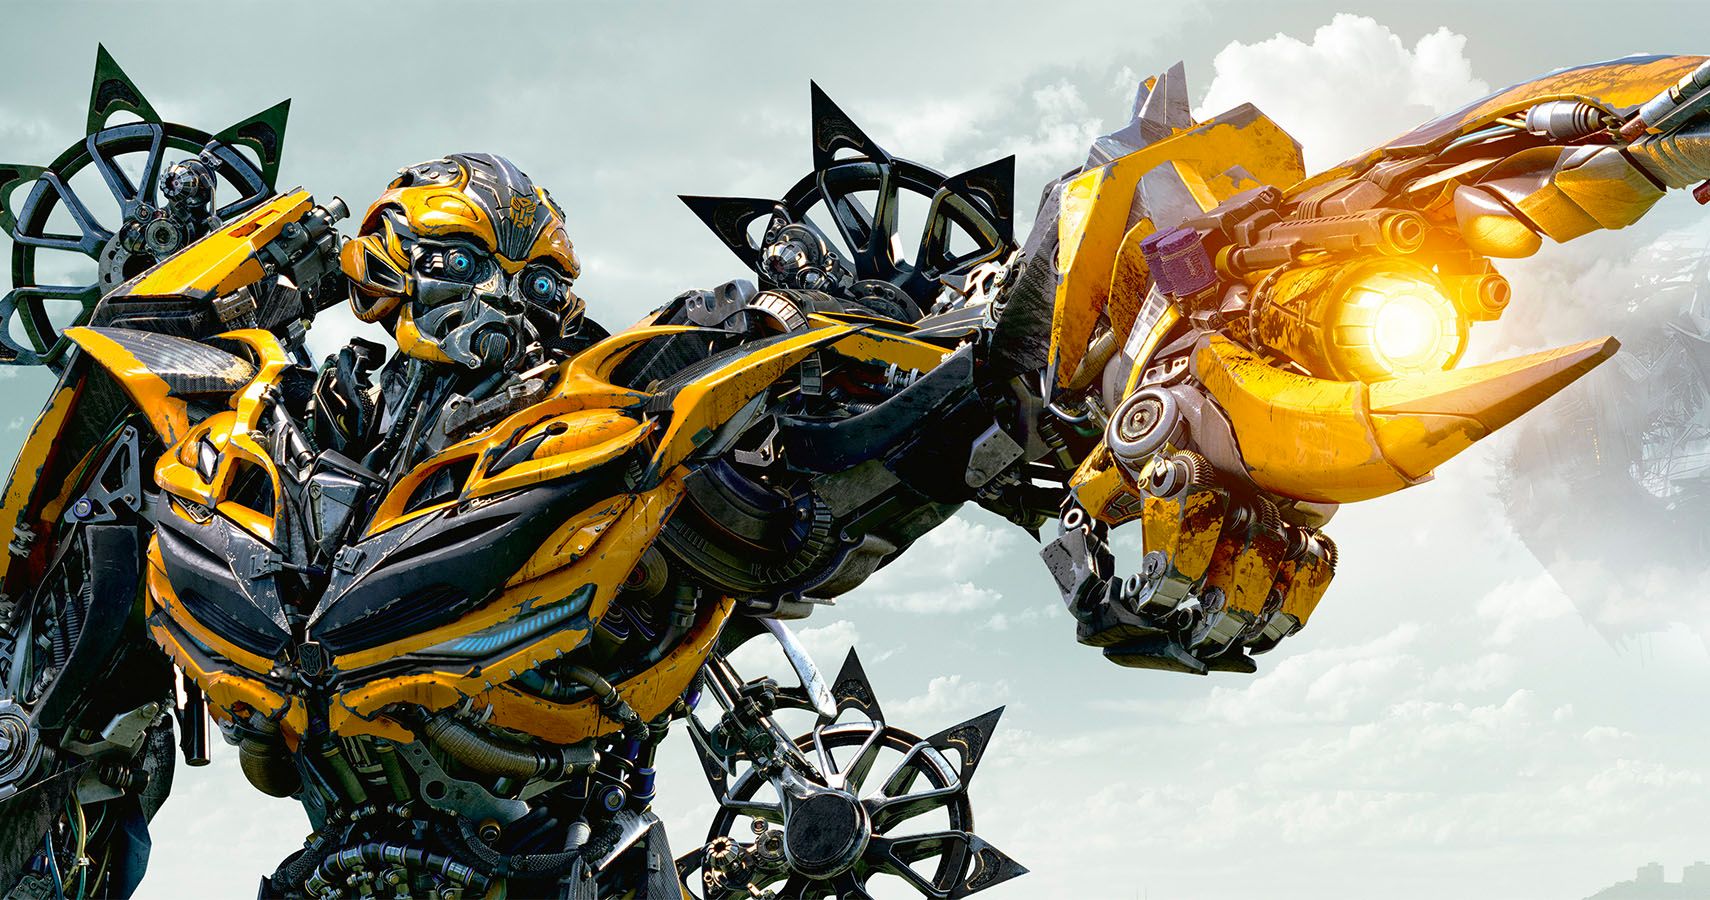 8 Things Bumblebee Did Better Than Other Transformers Movies (& 2